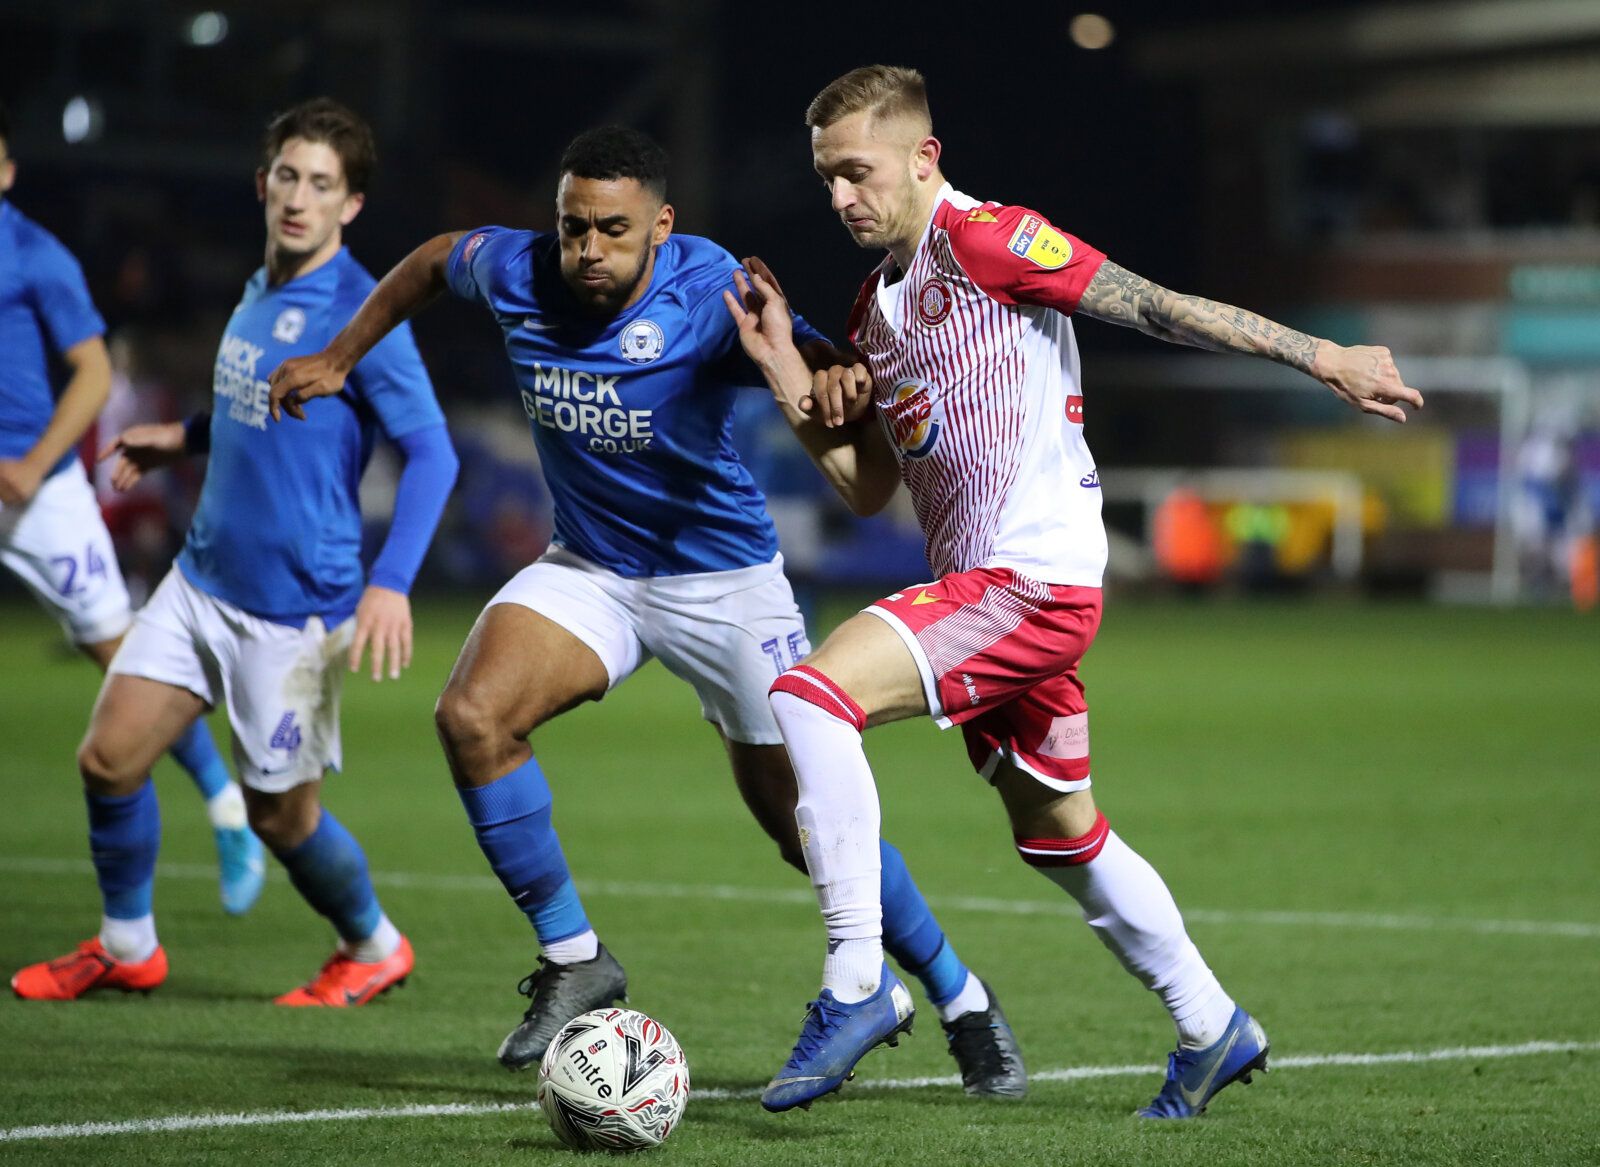 Soccer Football - FA Cup First Round Replay - Peterborough United v Stevenage - Weston Homes Stadium, Peterborough, Britain - November 19, 2019   Stevenage's Charlie Lakin in action with Peterborough United's Nathan Thompson   Action Images/Molly Darlington